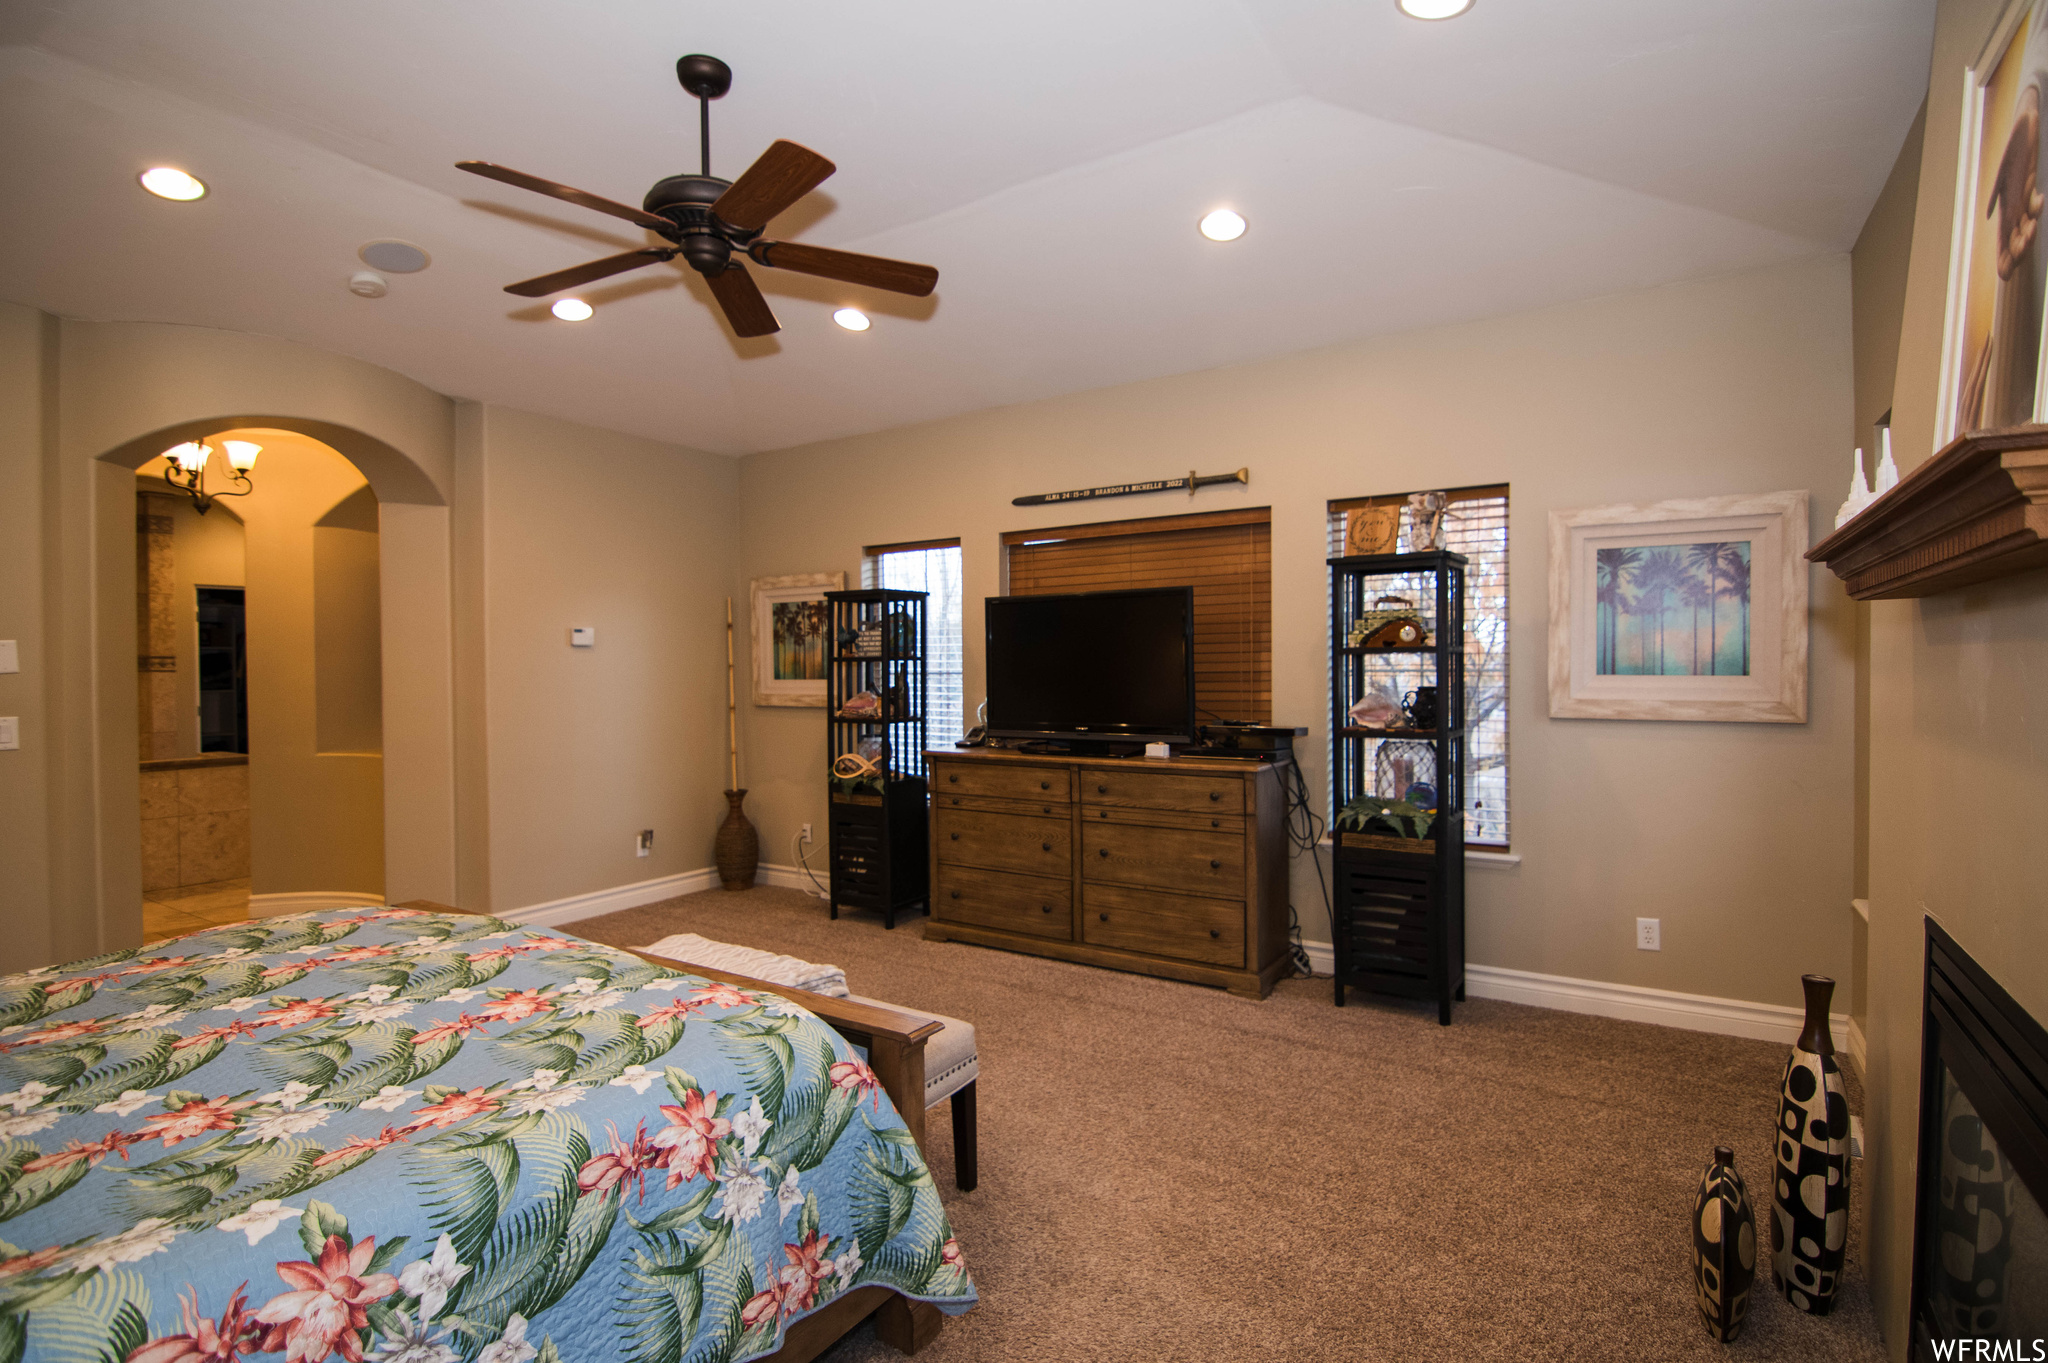 Bedroom with lofted ceiling, ceiling fan, connected bathroom, and light carpet